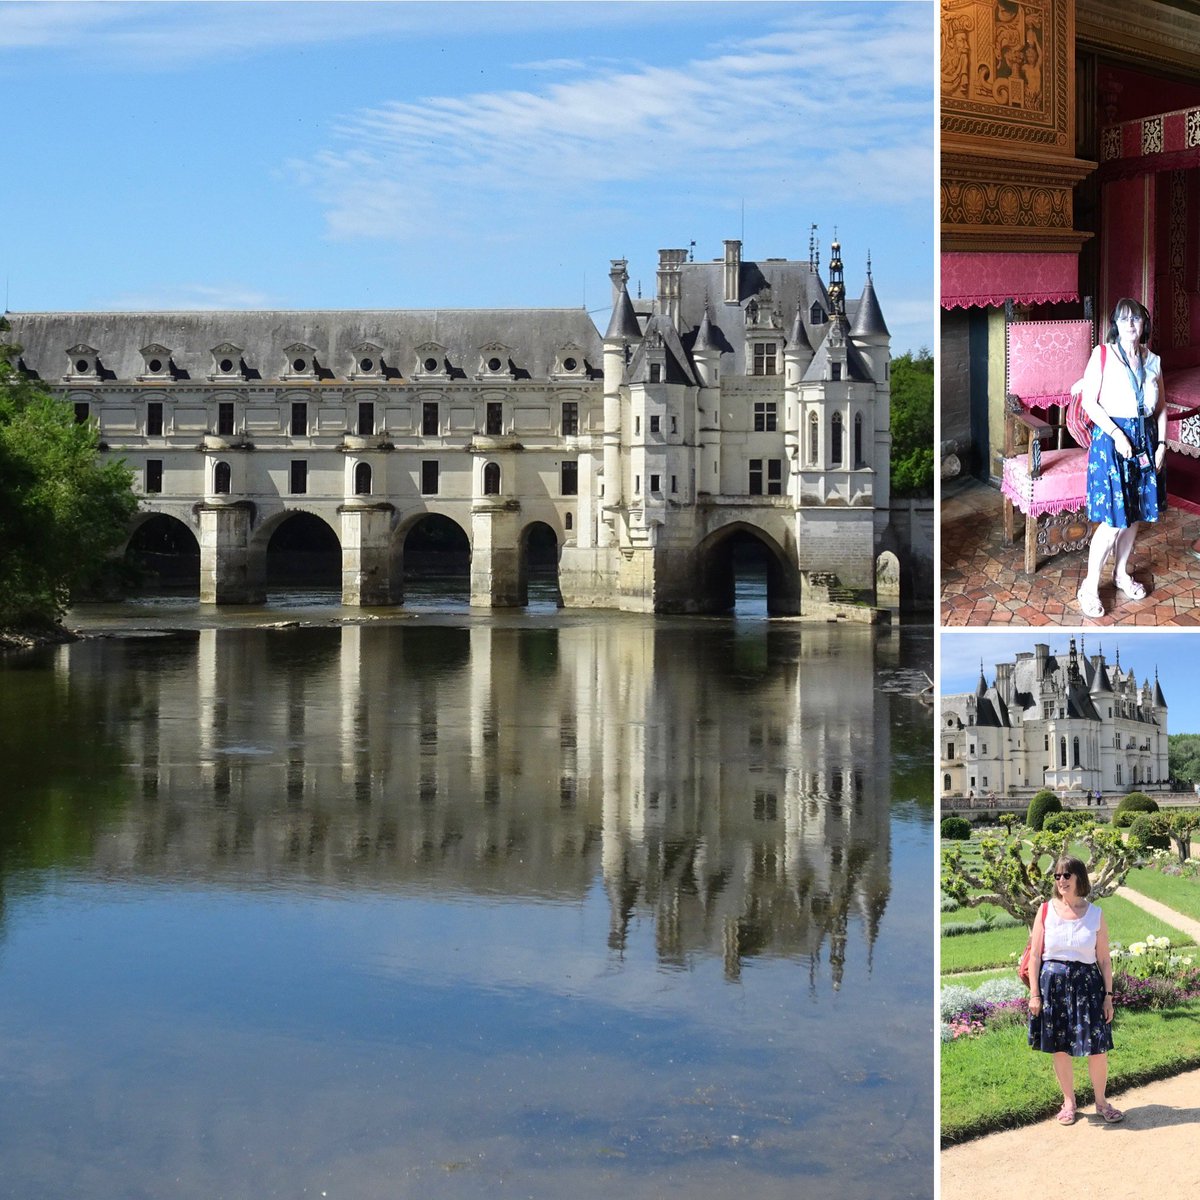 #throwbackthursday 16May 2017 Château de Chenonceau, France #reflections #travels